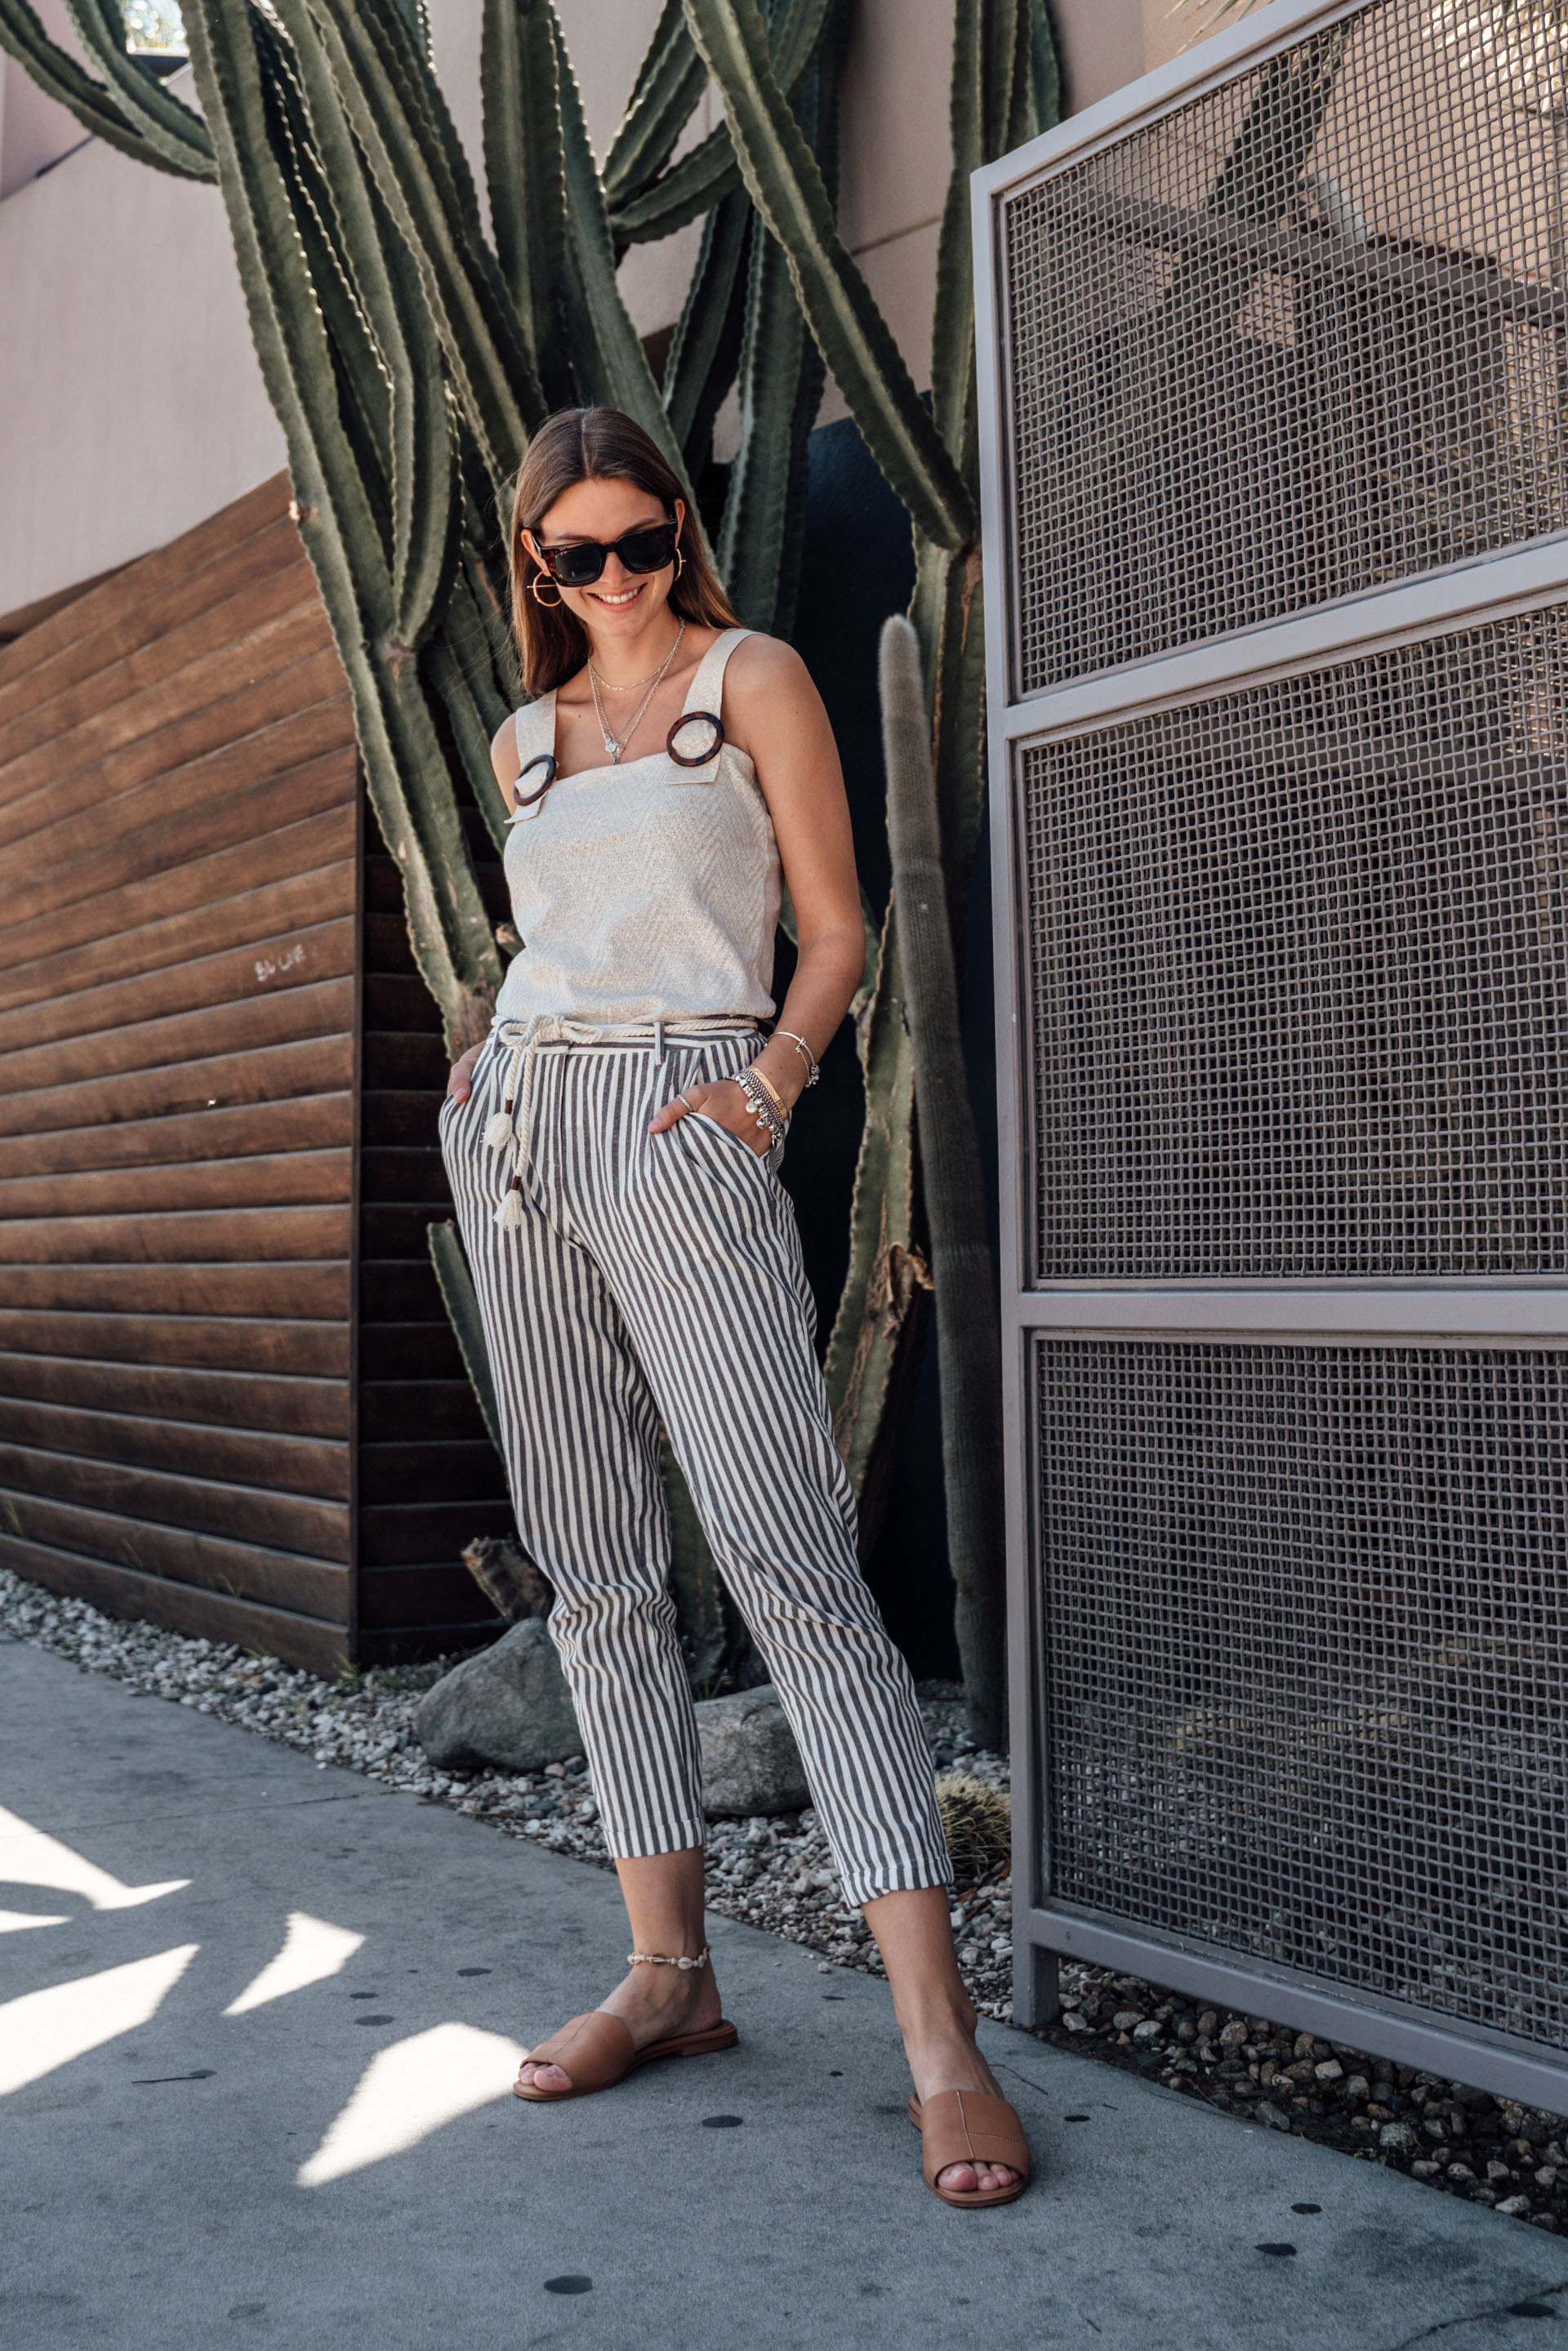 How to combine striped pants in spring and summer